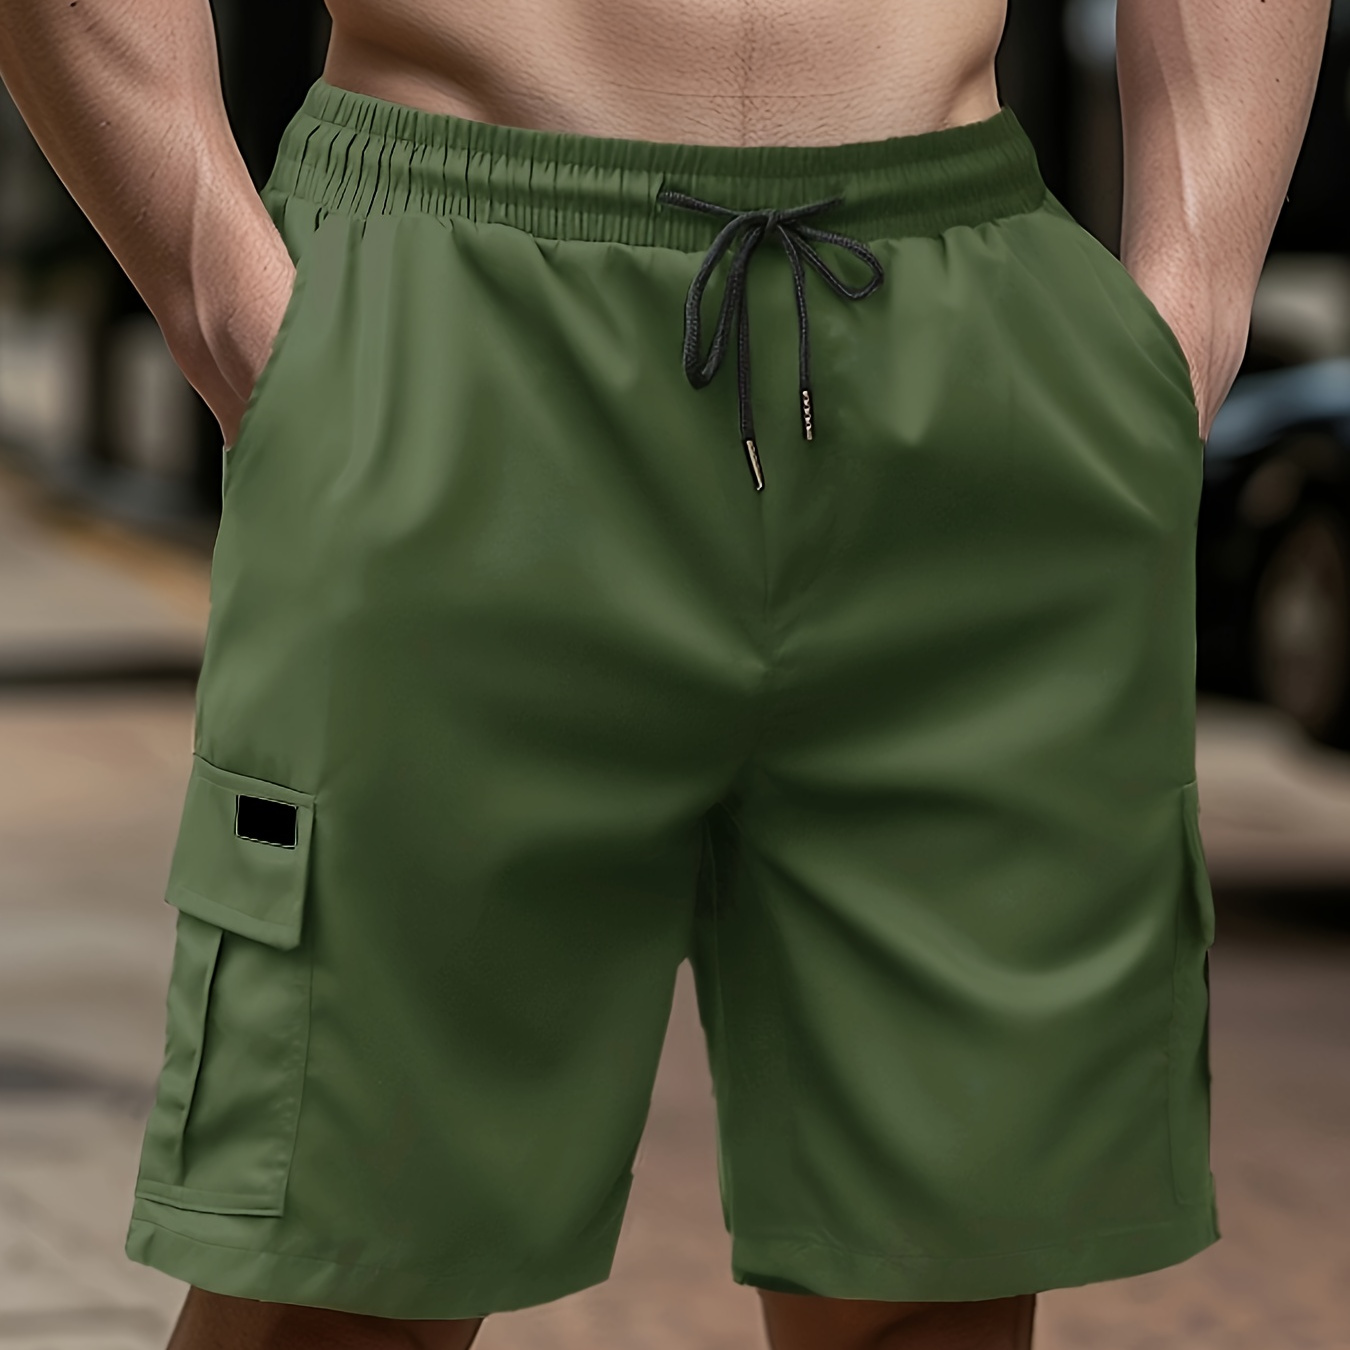 

Classic Design Men's Drawstring Cargo Shorts, Loose Fit Shorts With Pockets, Men's Work Pants Outdoors (no Back Pockets, Only Pocket Flaps)